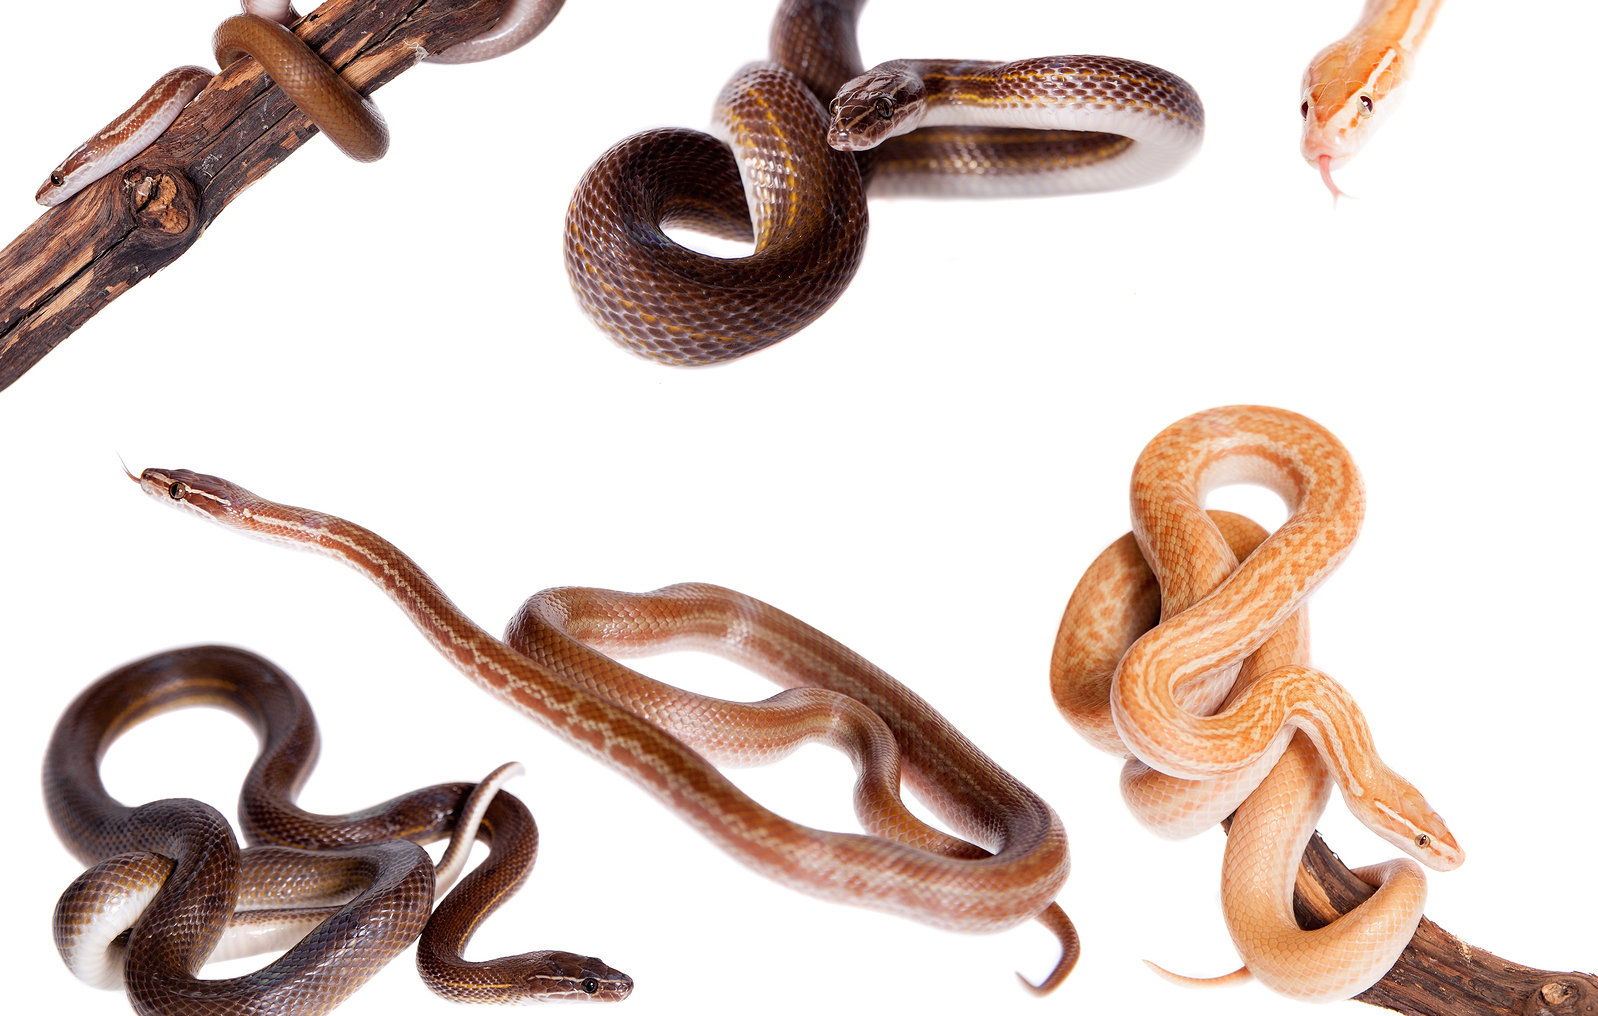 Different types of snakes with a white backdrop